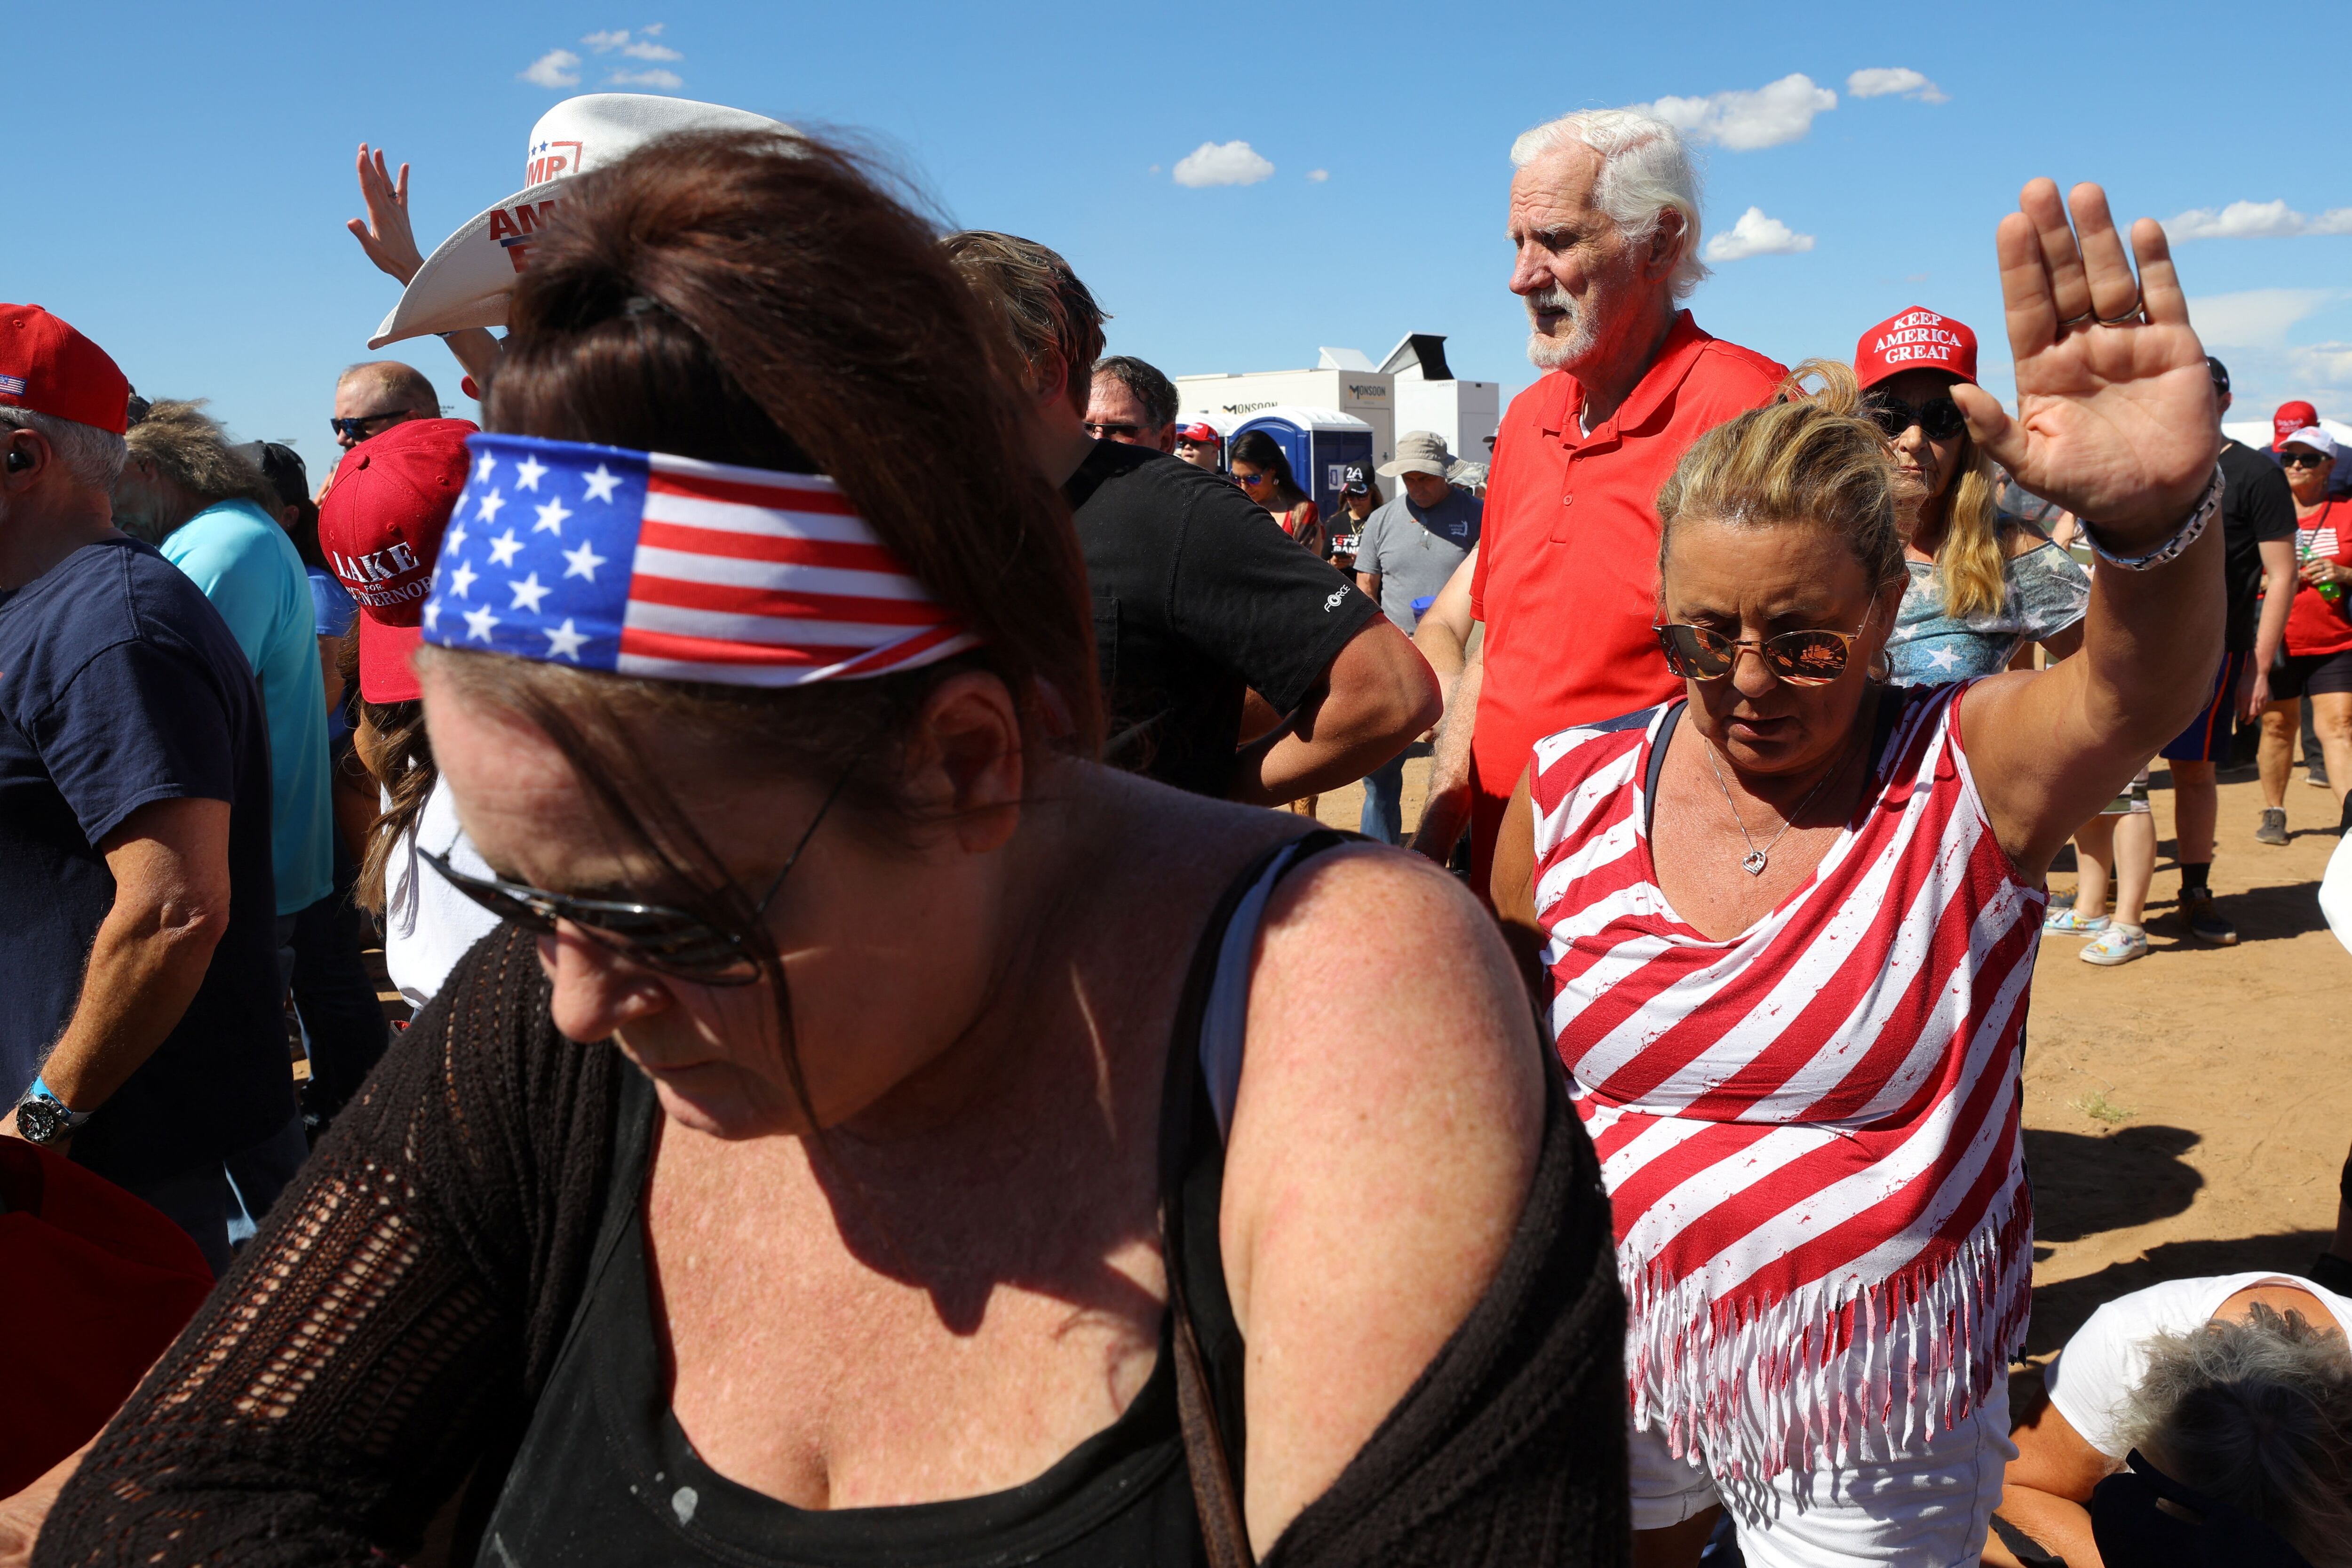 Republican supporters pray before the start of a rally in Mesa, Arizona.  REUTERS/Brian Snyder